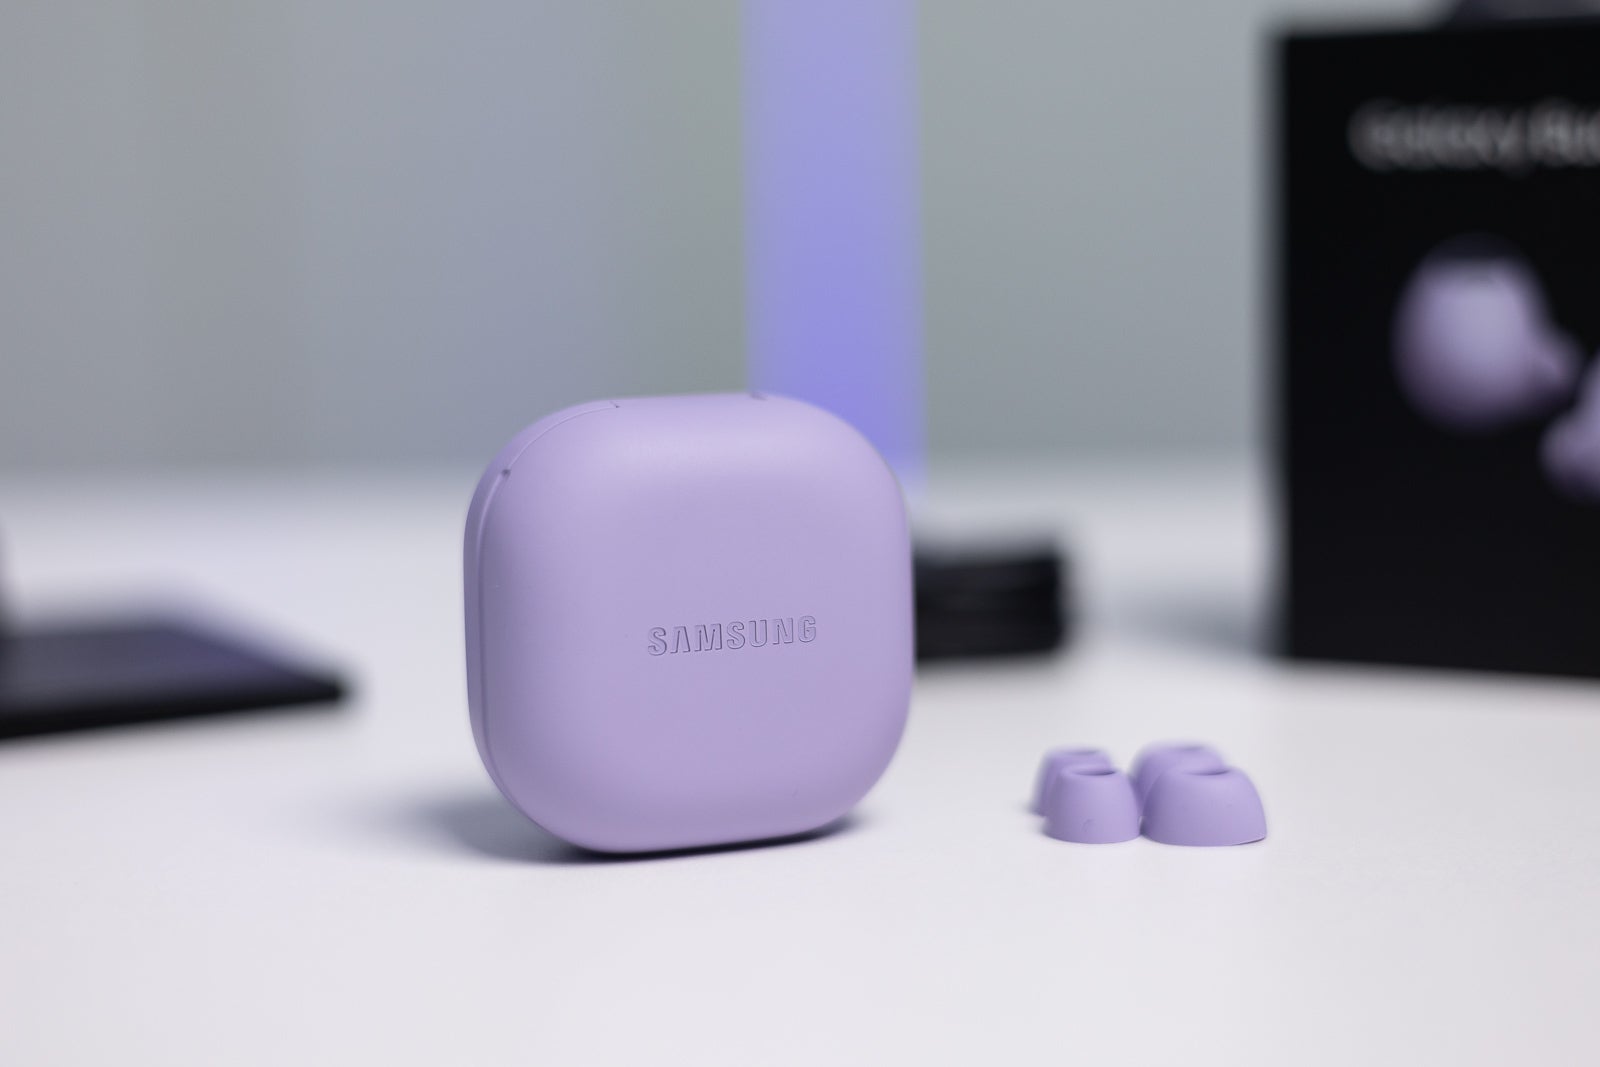 (Image credit - PhoneArena) Galaxy Buds 2 Pro case - Galaxy Buds 2 Pro review: Sleeker design, but is it worth the price jump?